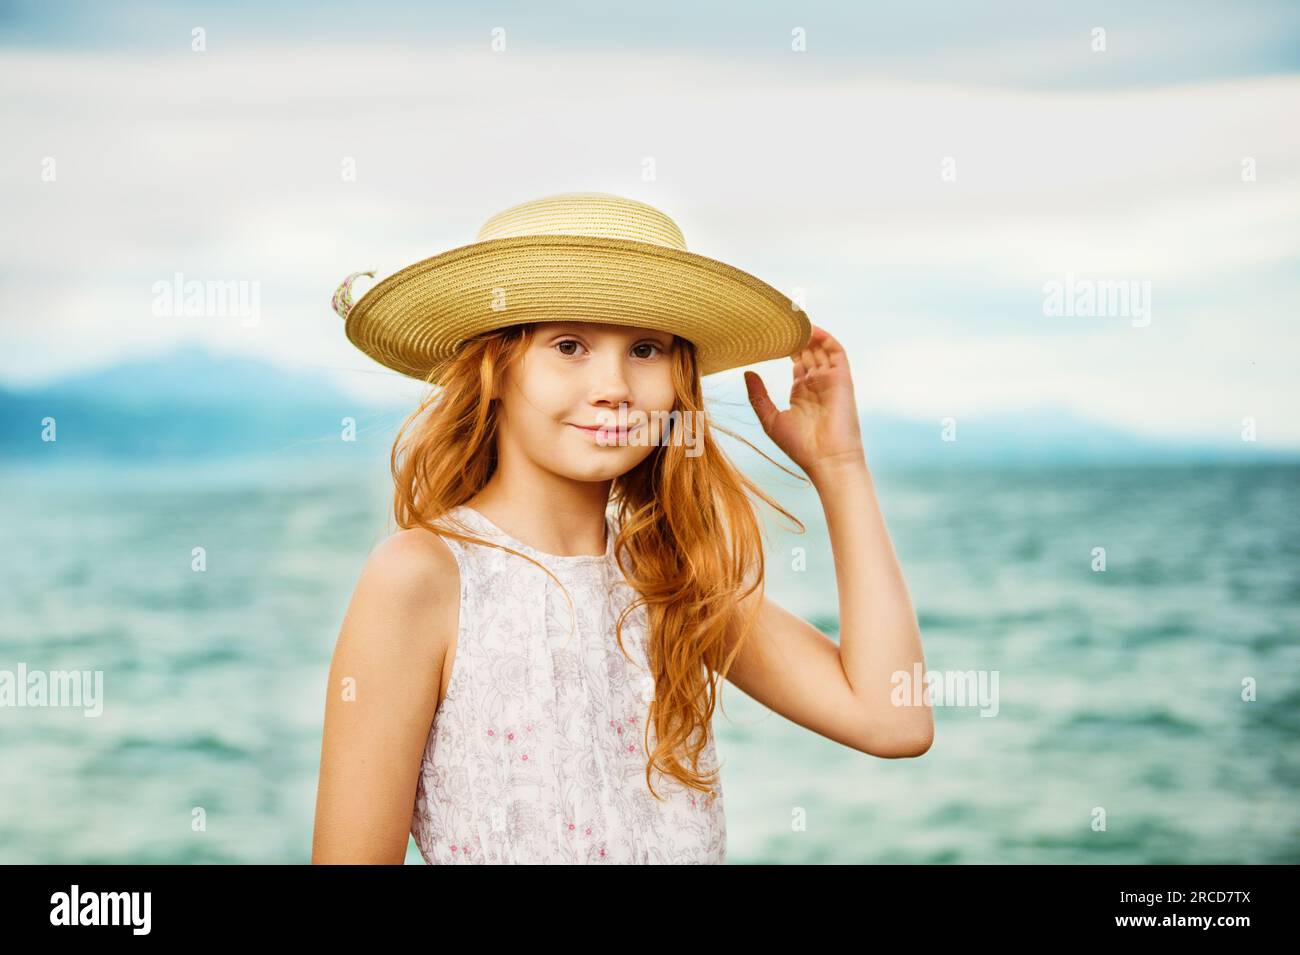 Pretty little girl with long red hair playing by the lake on a very windy day, wearing big hat Stock Photo